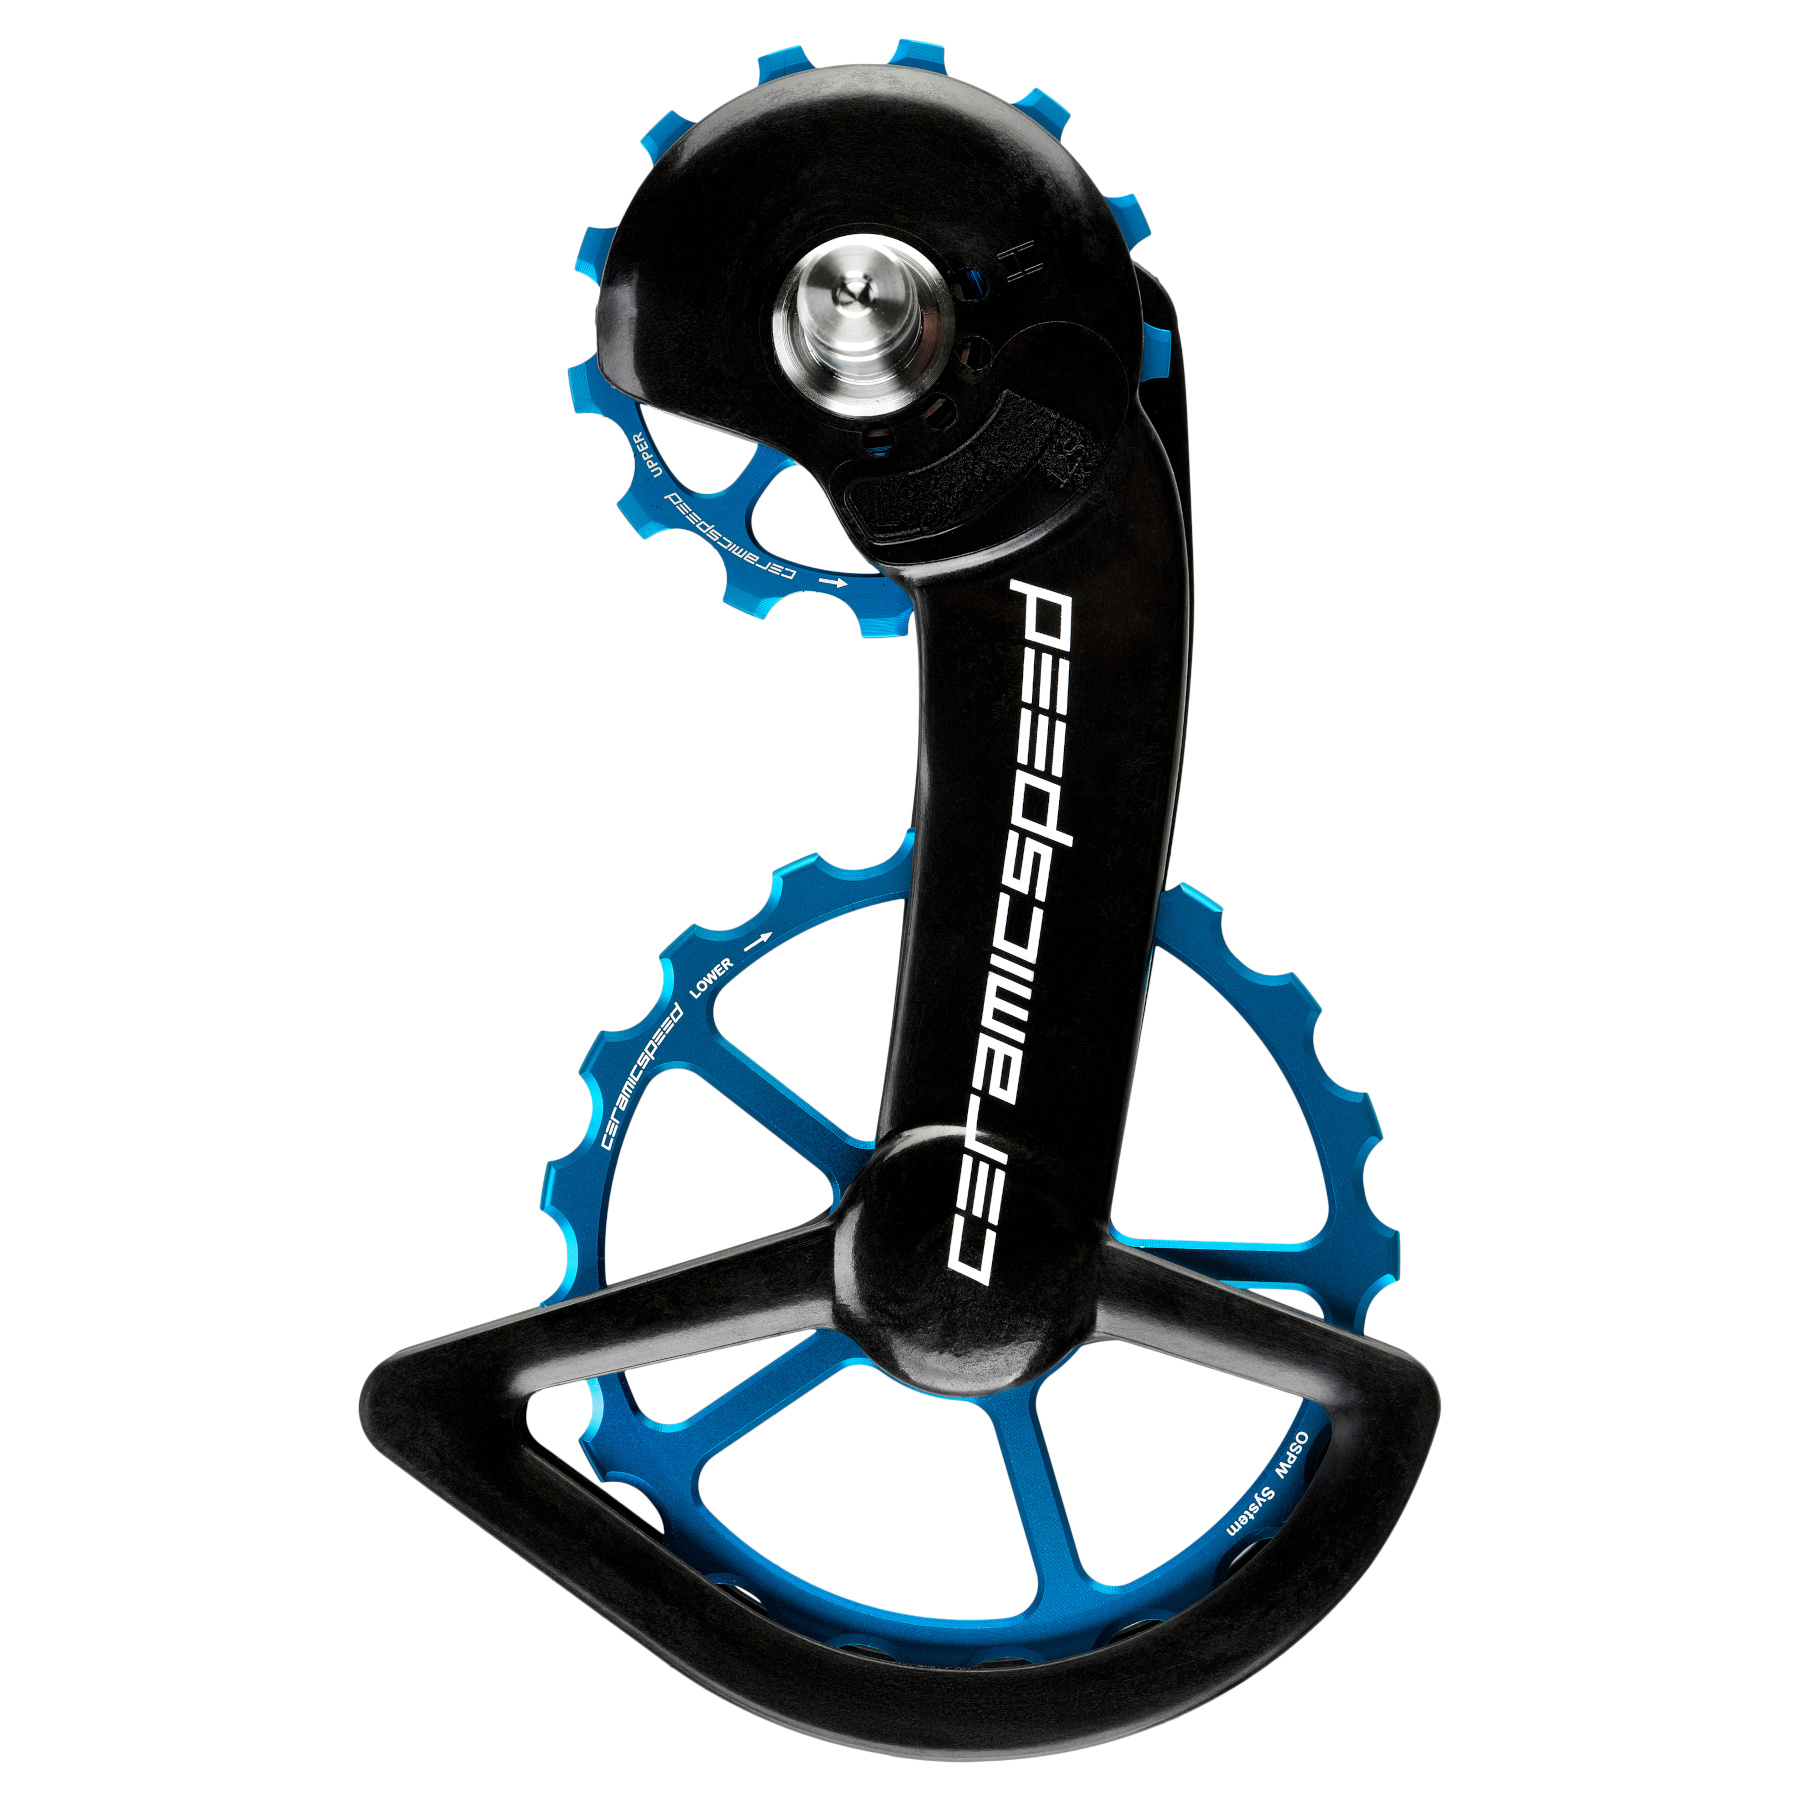 Picture of CeramicSpeed OSPW Derailleur Pulley System - for Shimano R9200/R8100 (12s) | 13/19 Teeth - blue